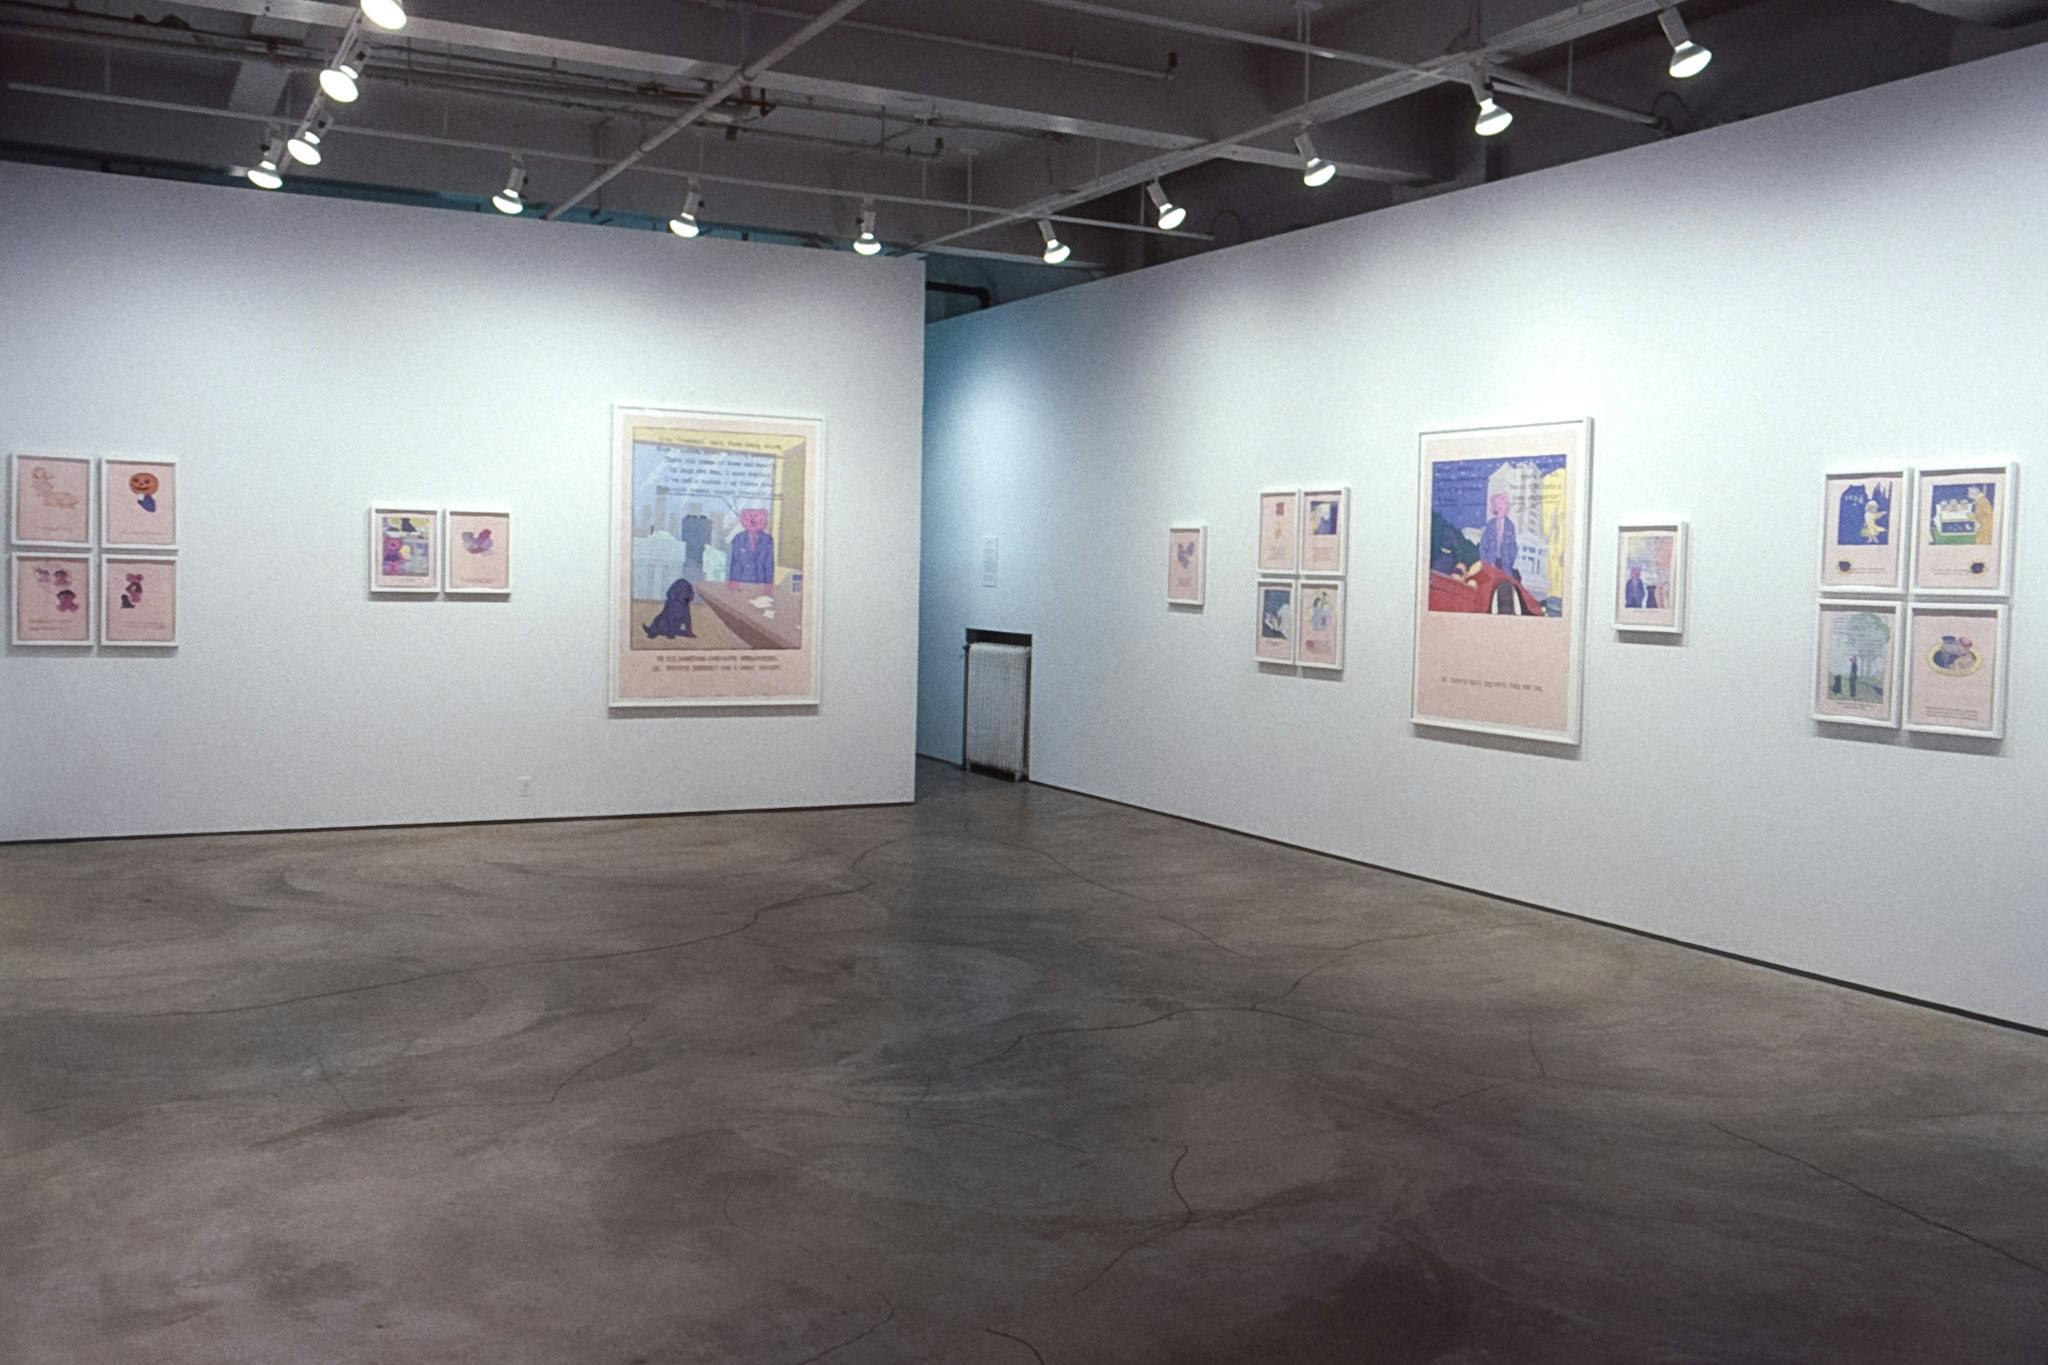 An installation view of a gallery space shows drawings by the same artist on the walls. Drawings vary in size but share the same light pink background. The style of drawing mimics comic books.